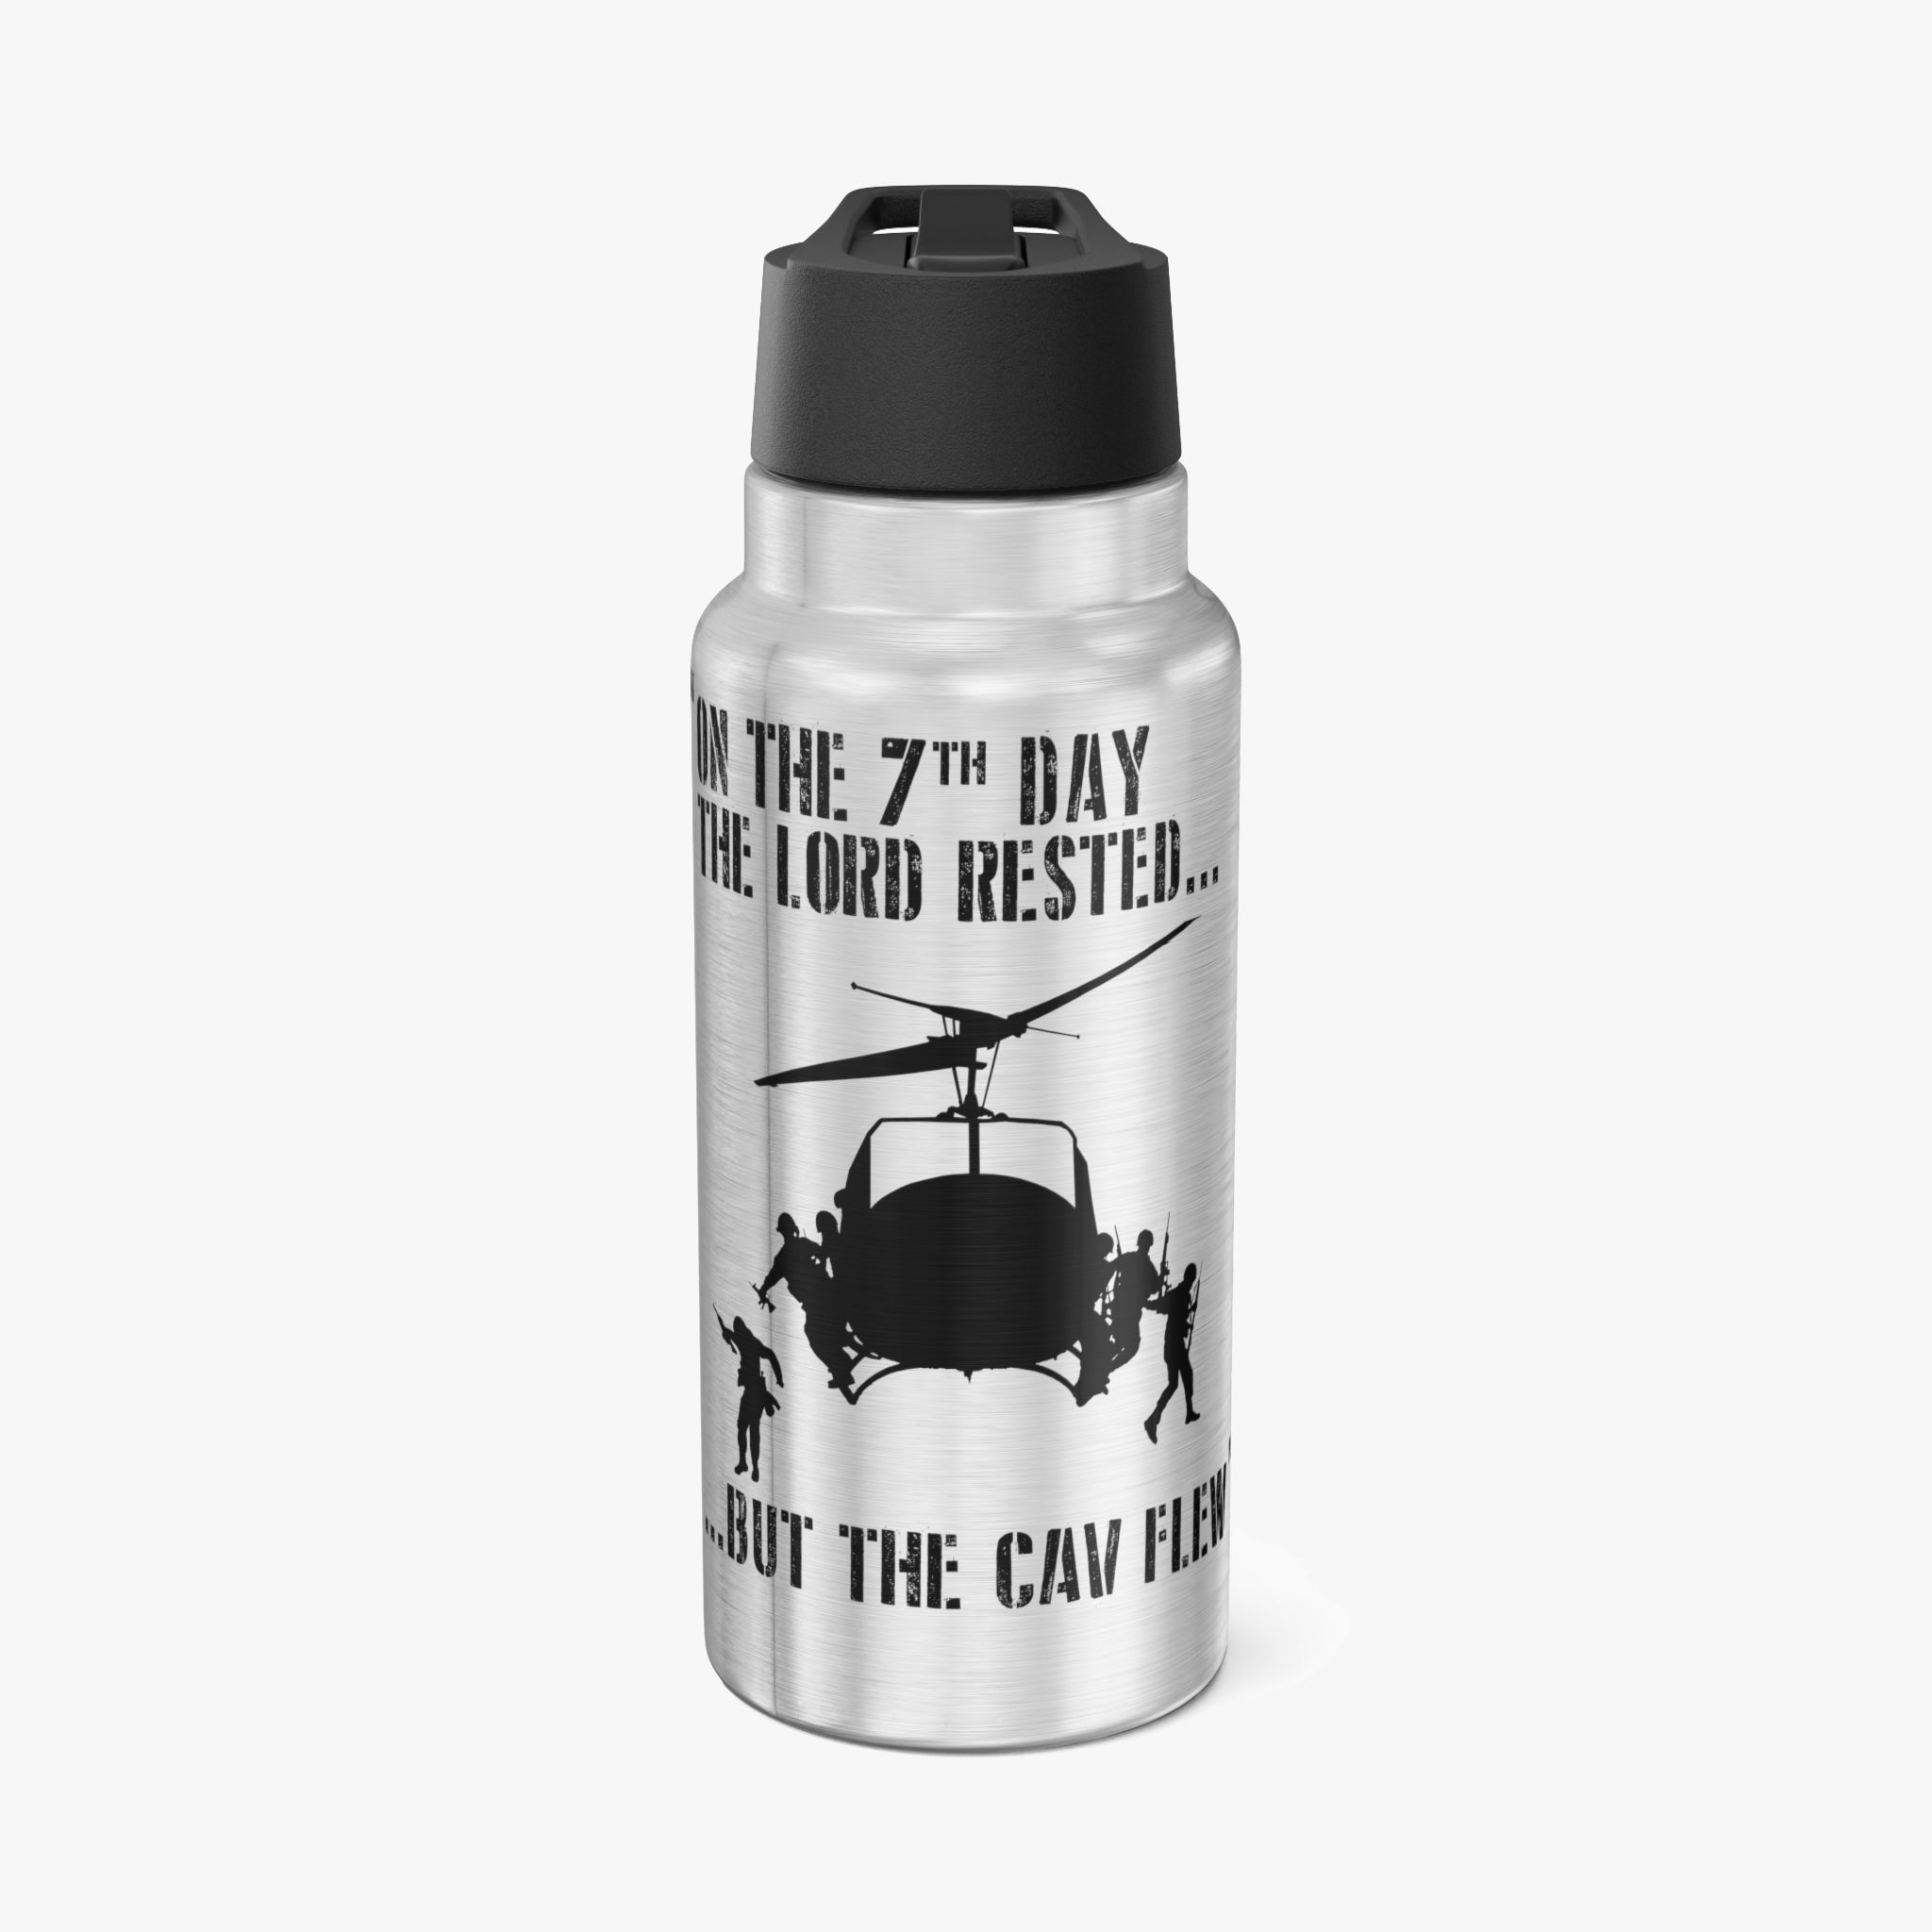 "On the 7th Day the Lord rested, but the Cav Flew" Tumbler, 32oz (950ml)